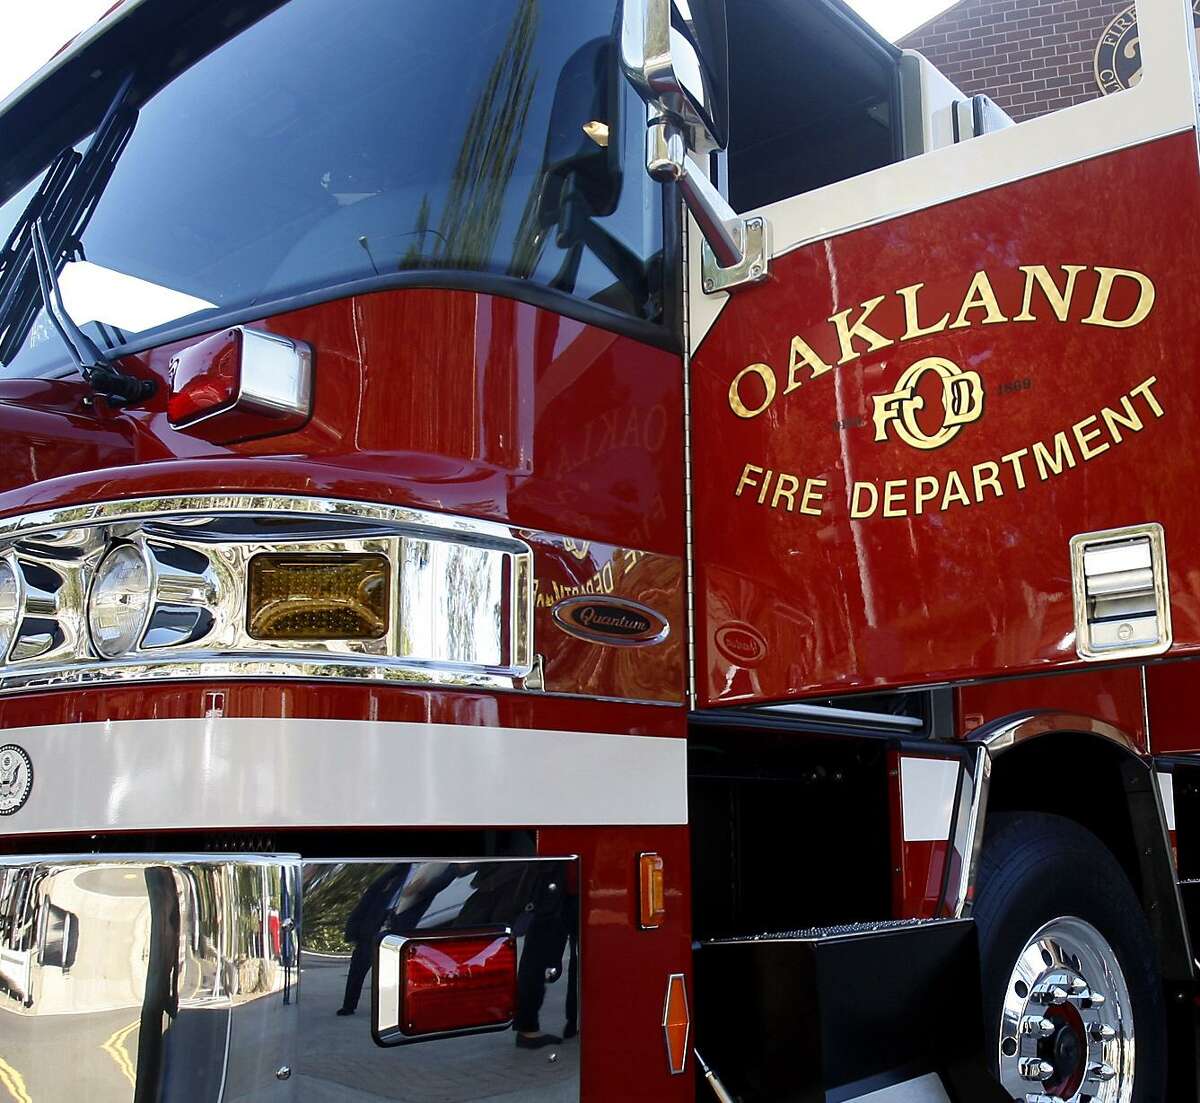 An Oakland Fire Department in Oakland, Calif. Fire officials launched an investigation after yet another fire sparked along Interstate 580.